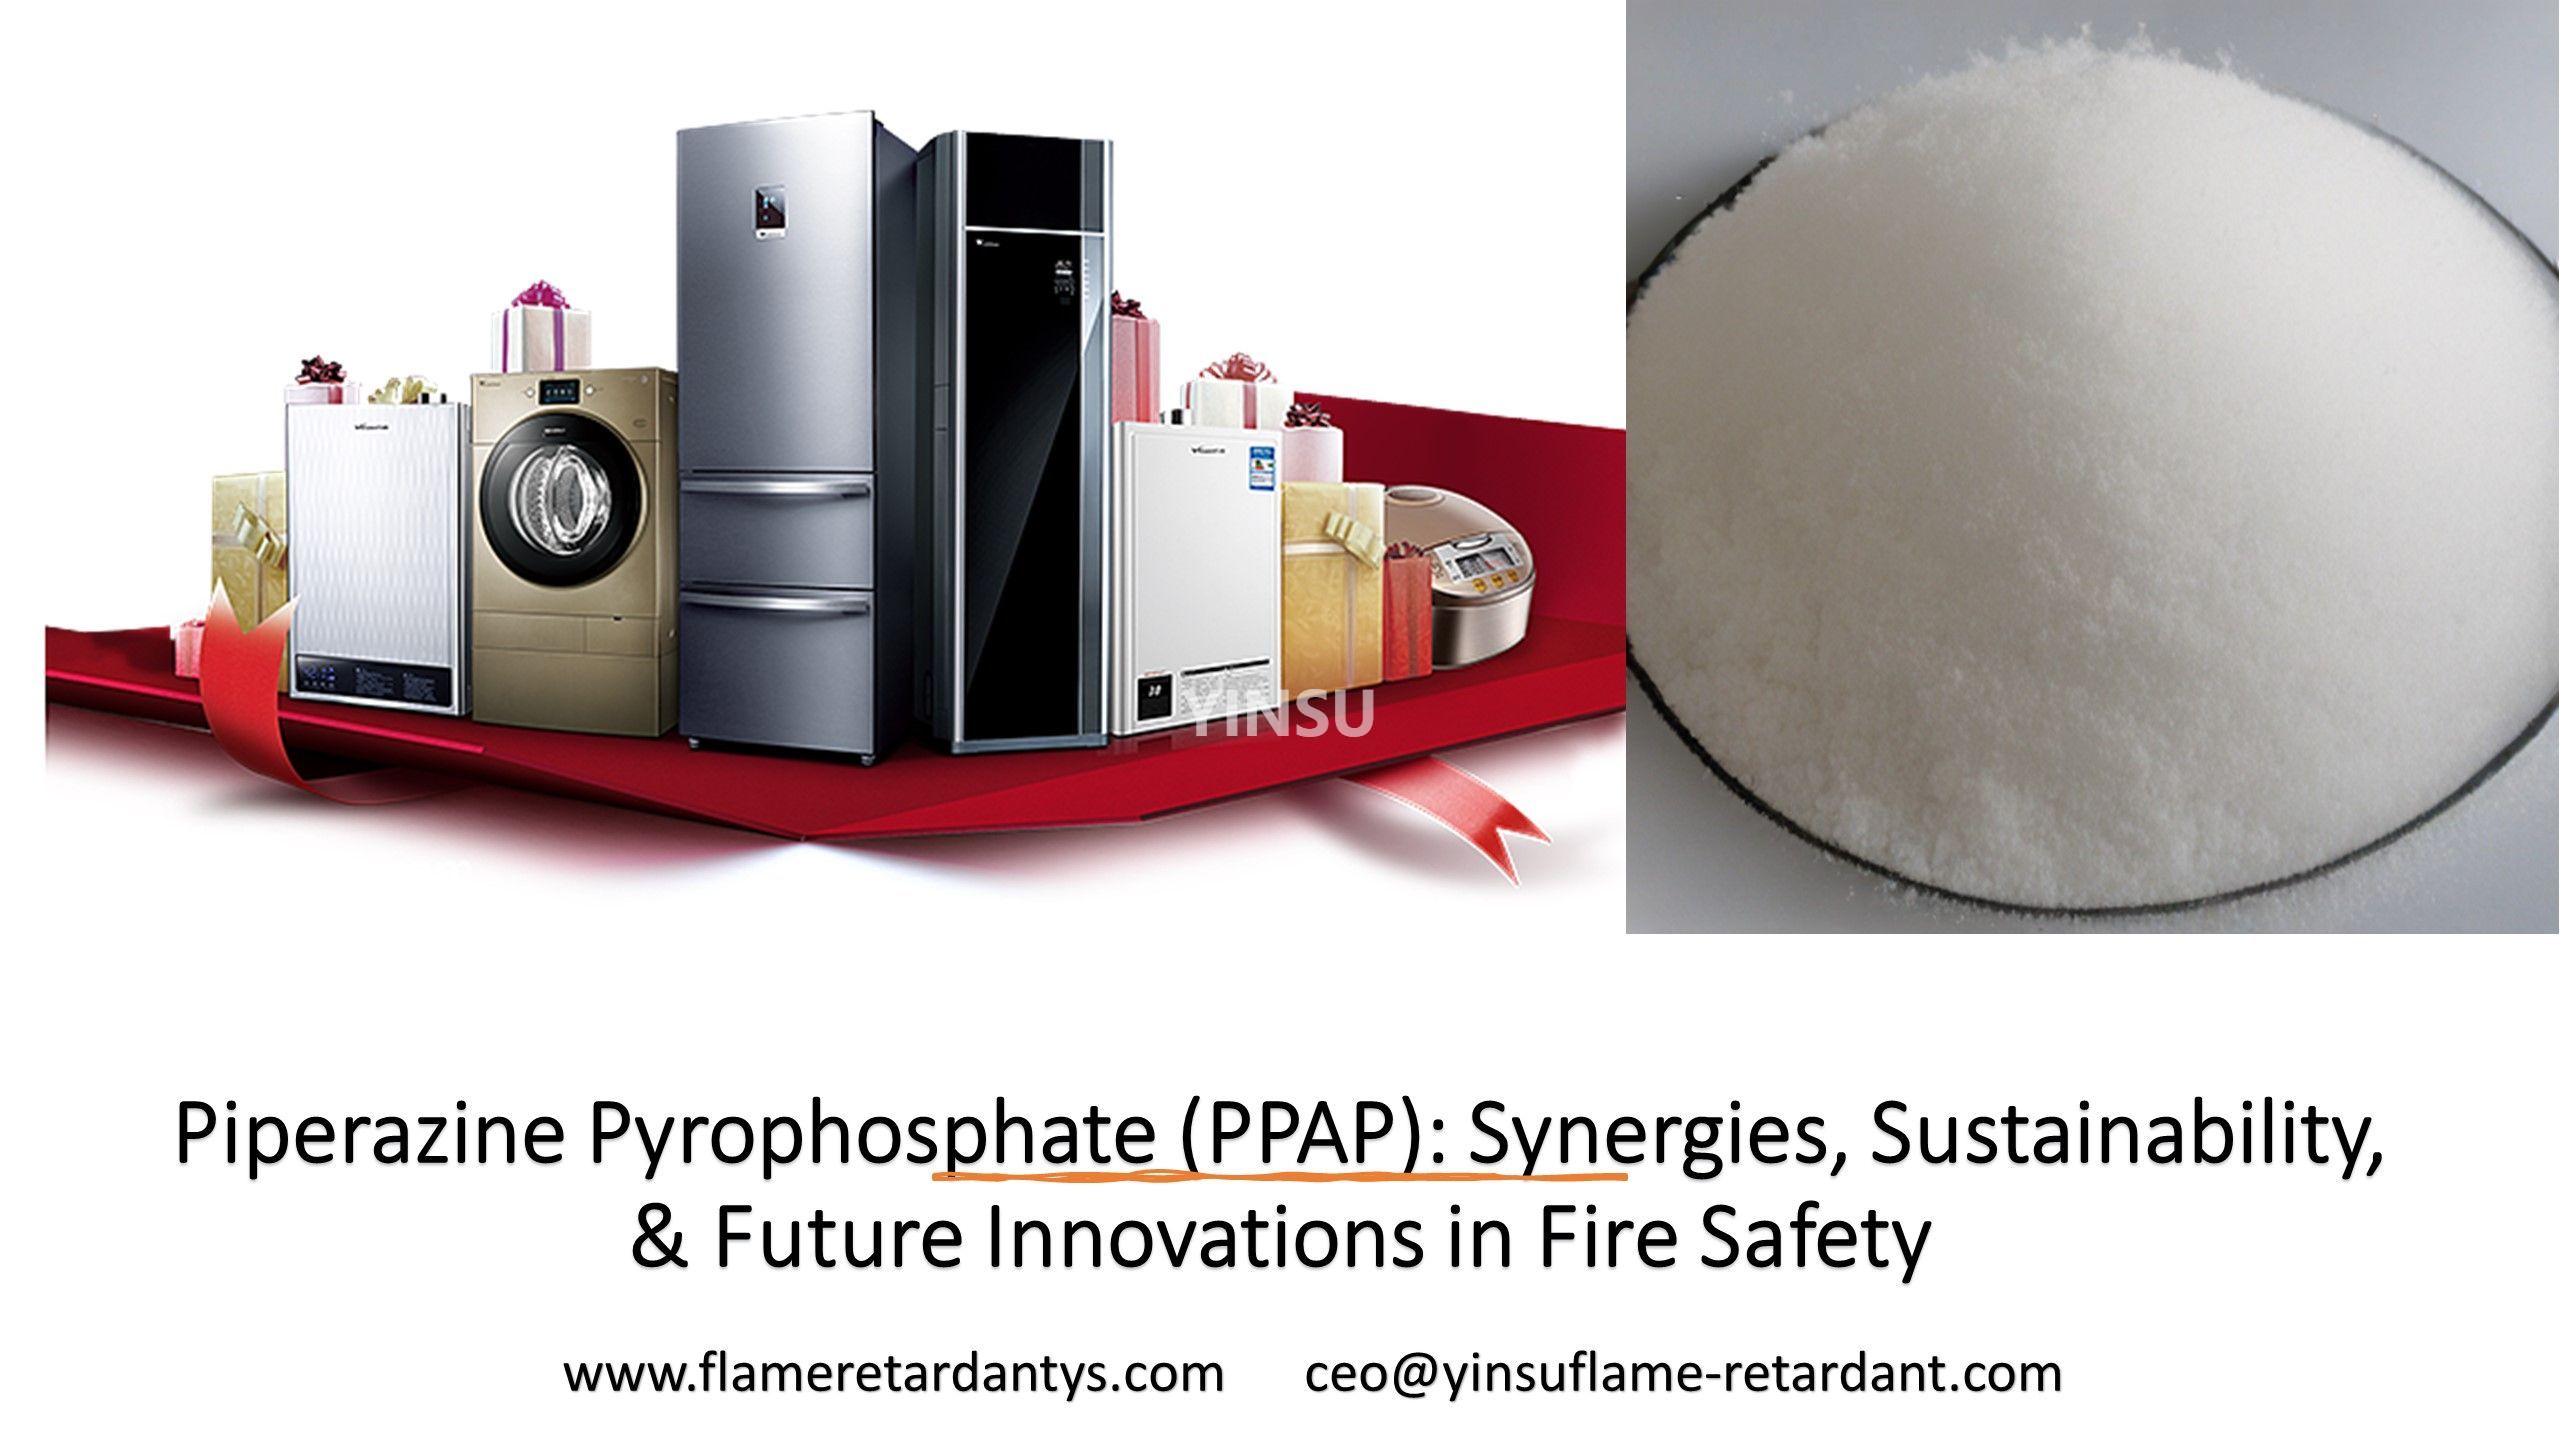 Piperazine Pyrophosphate (PPAP) Synergies, Sustainability, & Future Innovations in Fire Safety